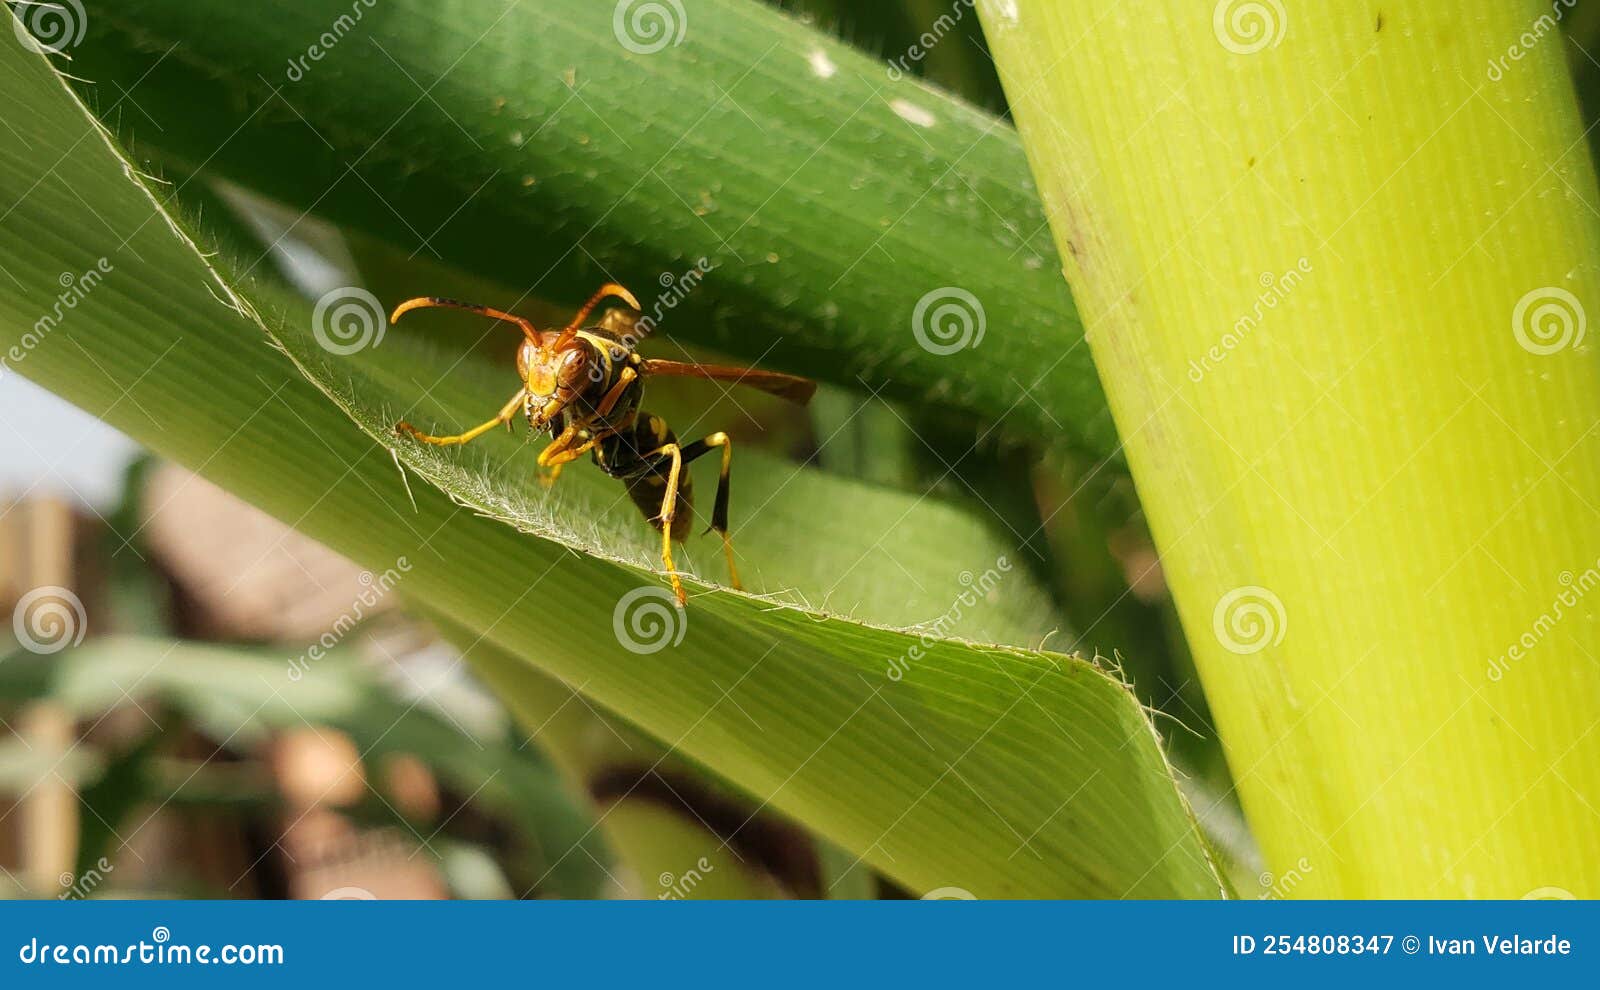 wasp on a corn plant